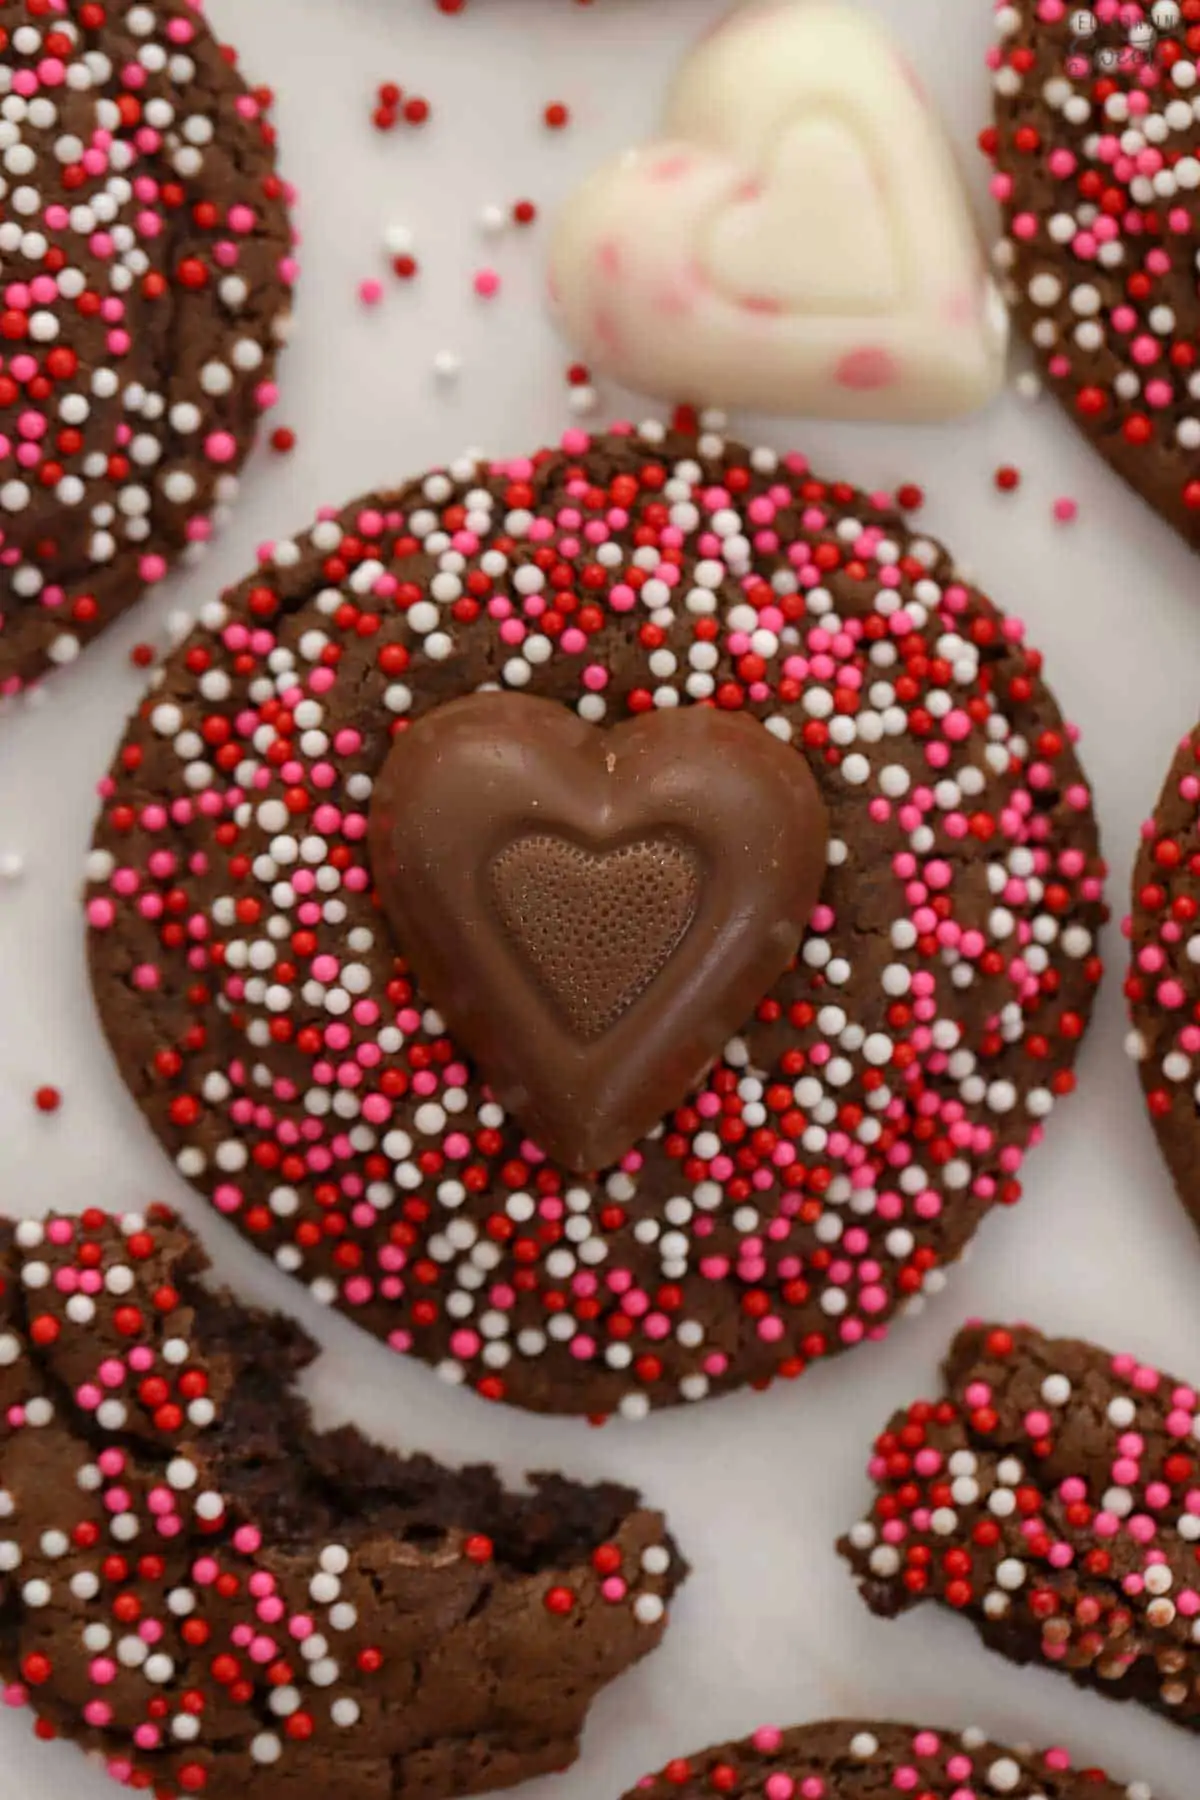 Chocolate cookies covered in red and pink sprinkles topped with chocolate hearts.